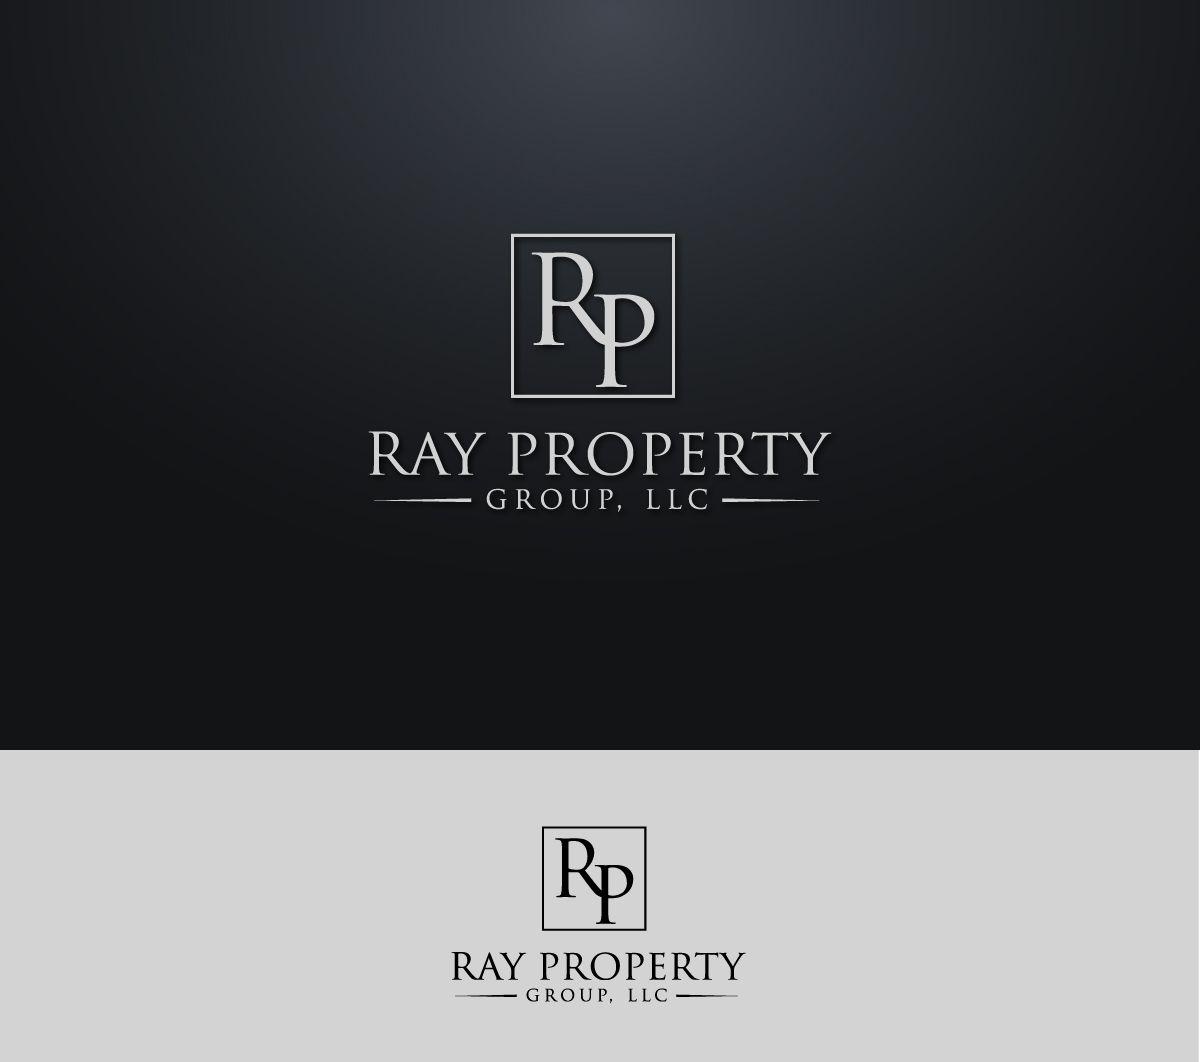 Black and Silver Logo - Serious, Professional, Business Logo Design for Ray Property Group ...